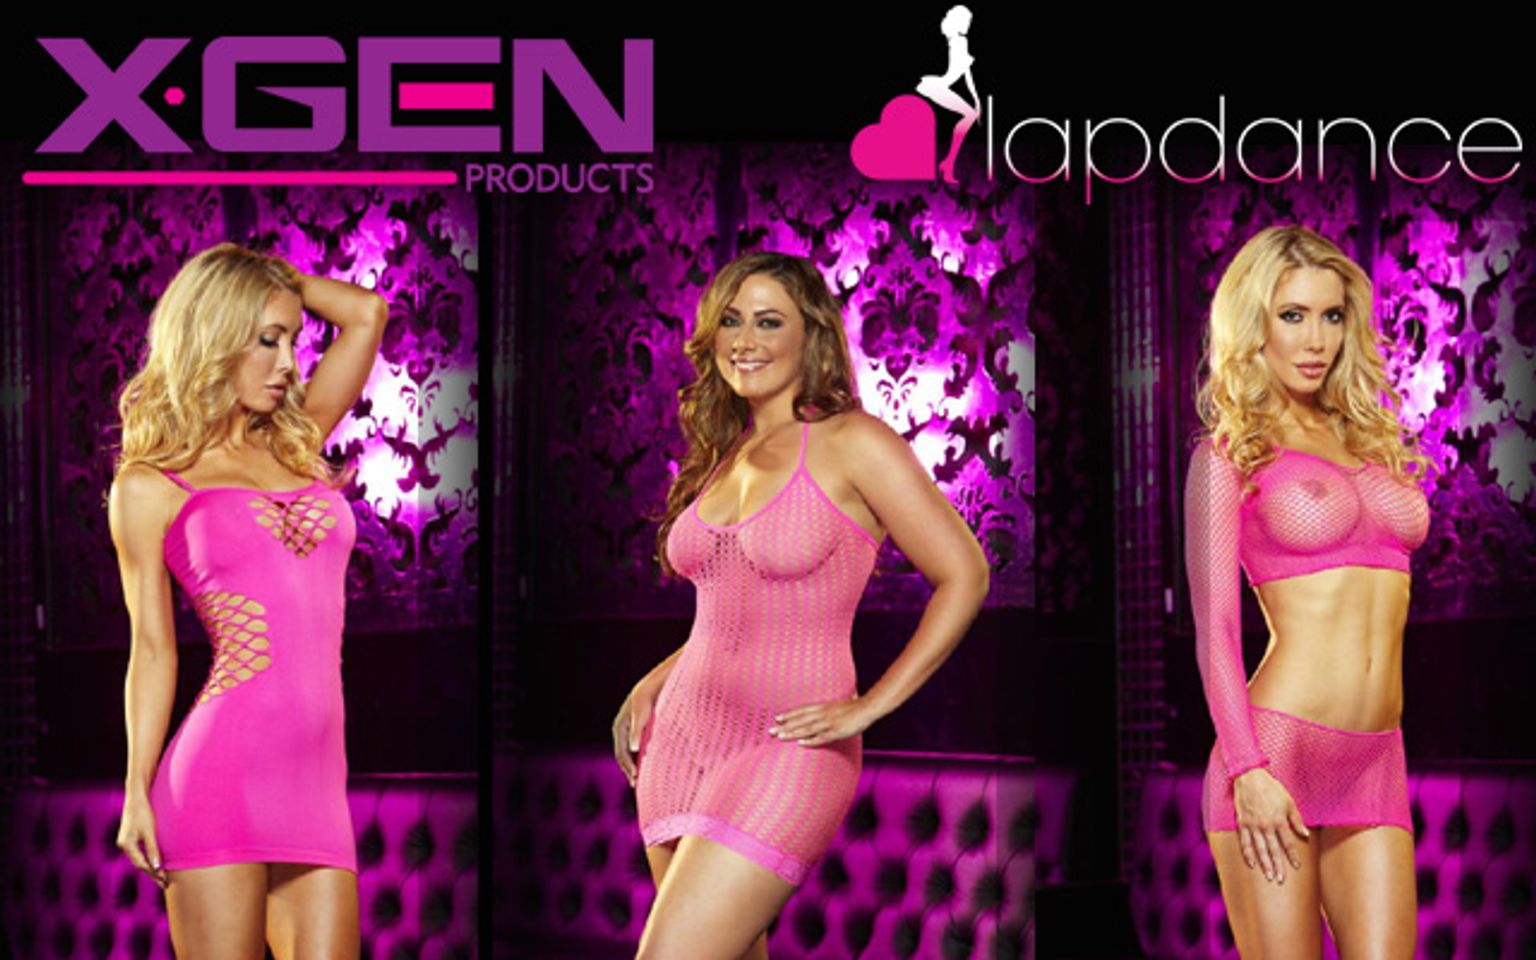 Xgen Products Releases New Lapdance Lingerie Styles